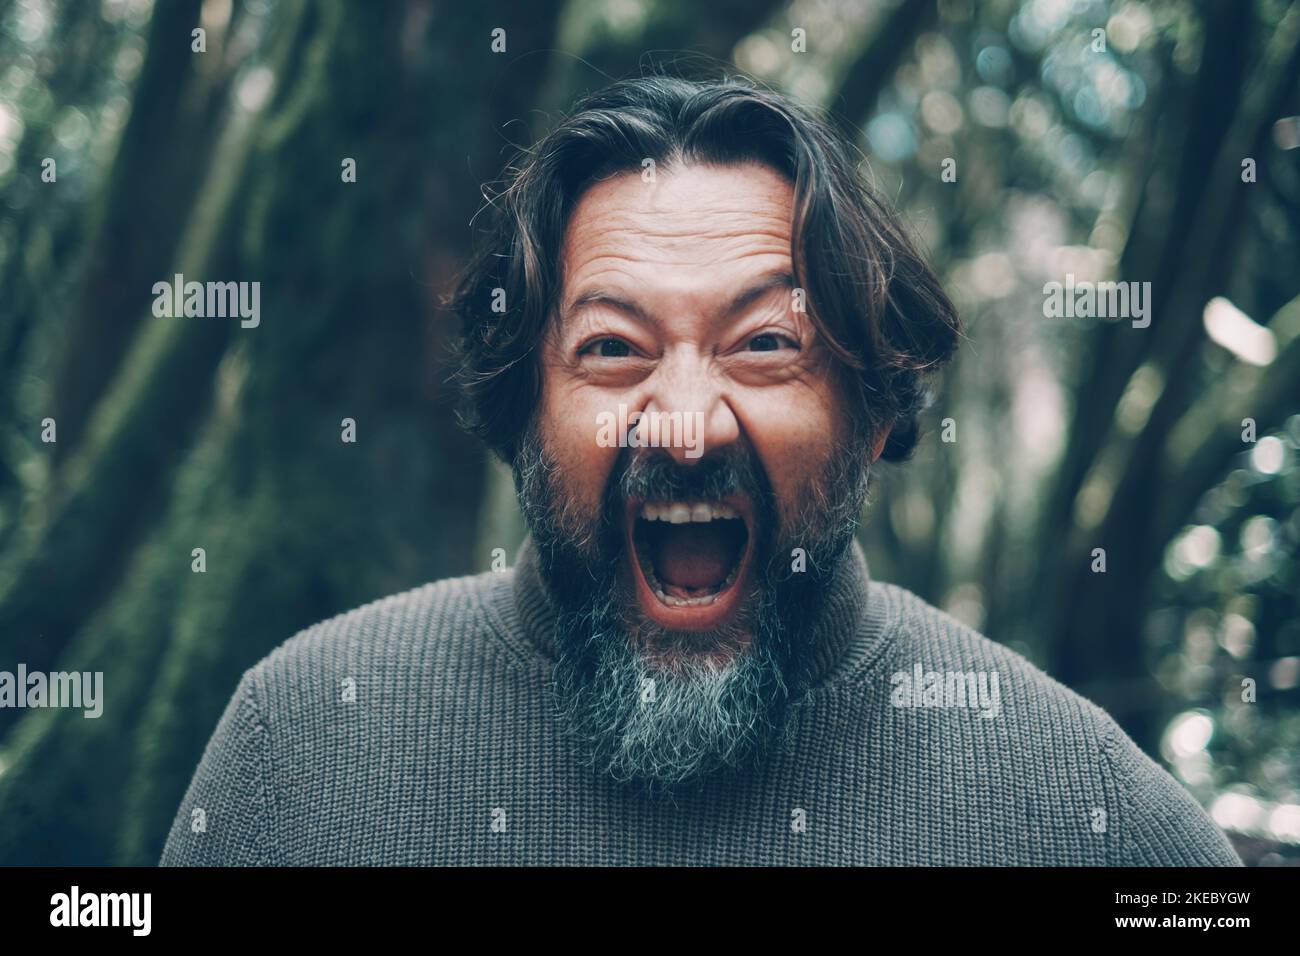 Mad mature man shouting crazy at the camera. Stressed people portrait concept life. Bearded young senior man shout with craziness and open mouth. Emotion and problems concept. Green nature background Stock Photo